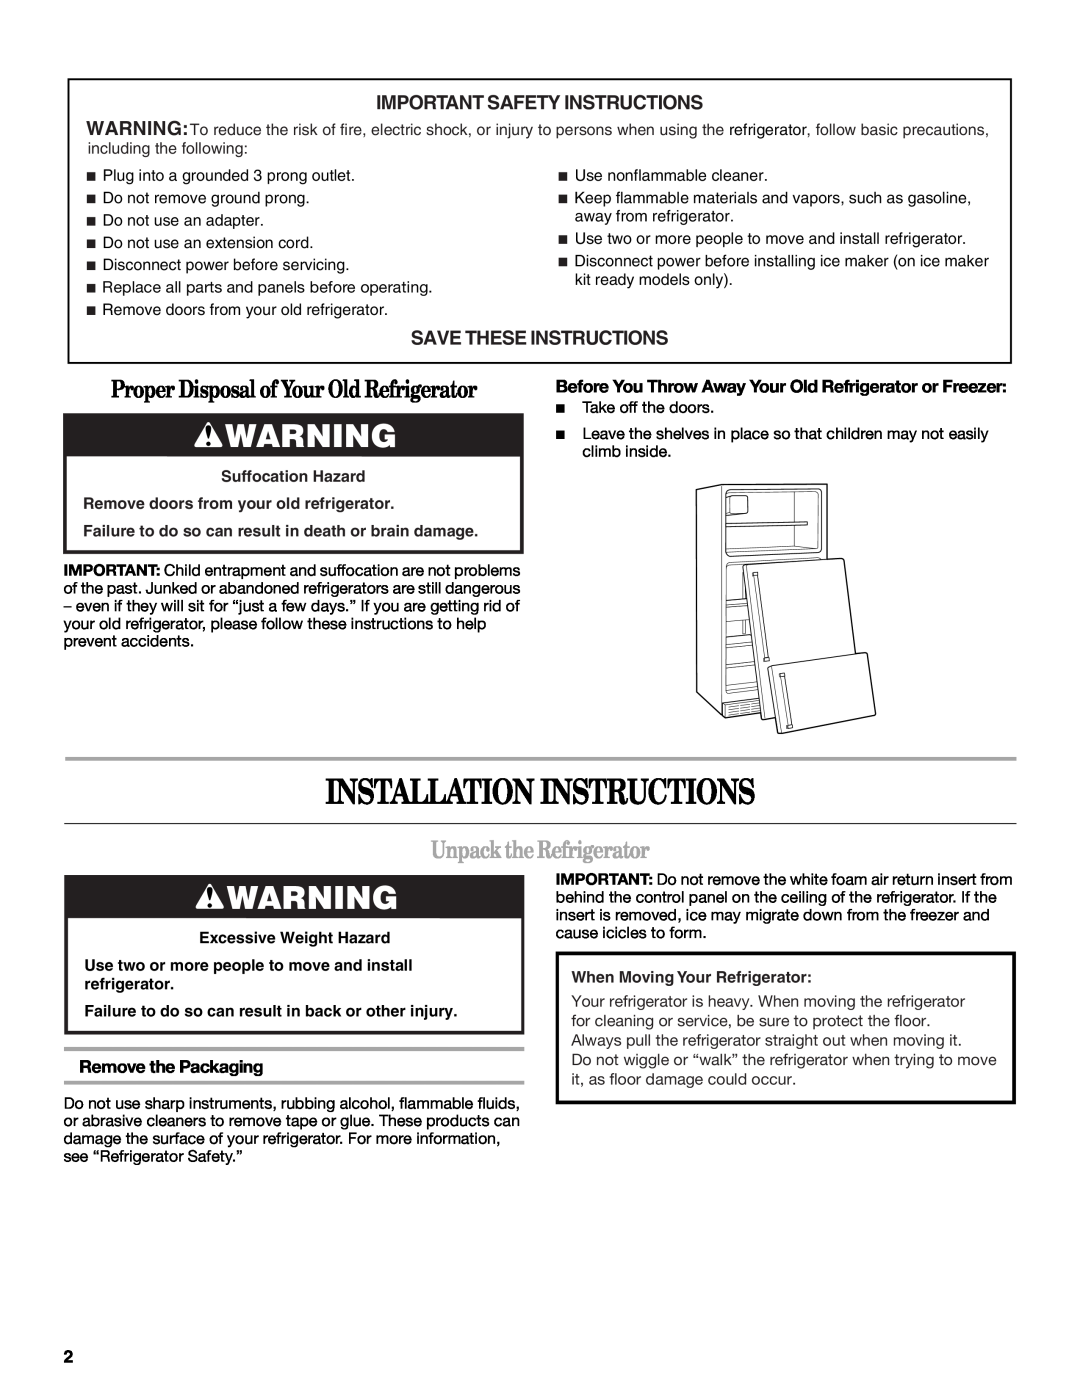 Amana ATB1932MRW Installation Instructions, Unpack the Refrigerator, Important Safety Instructions, Remove the Packaging 